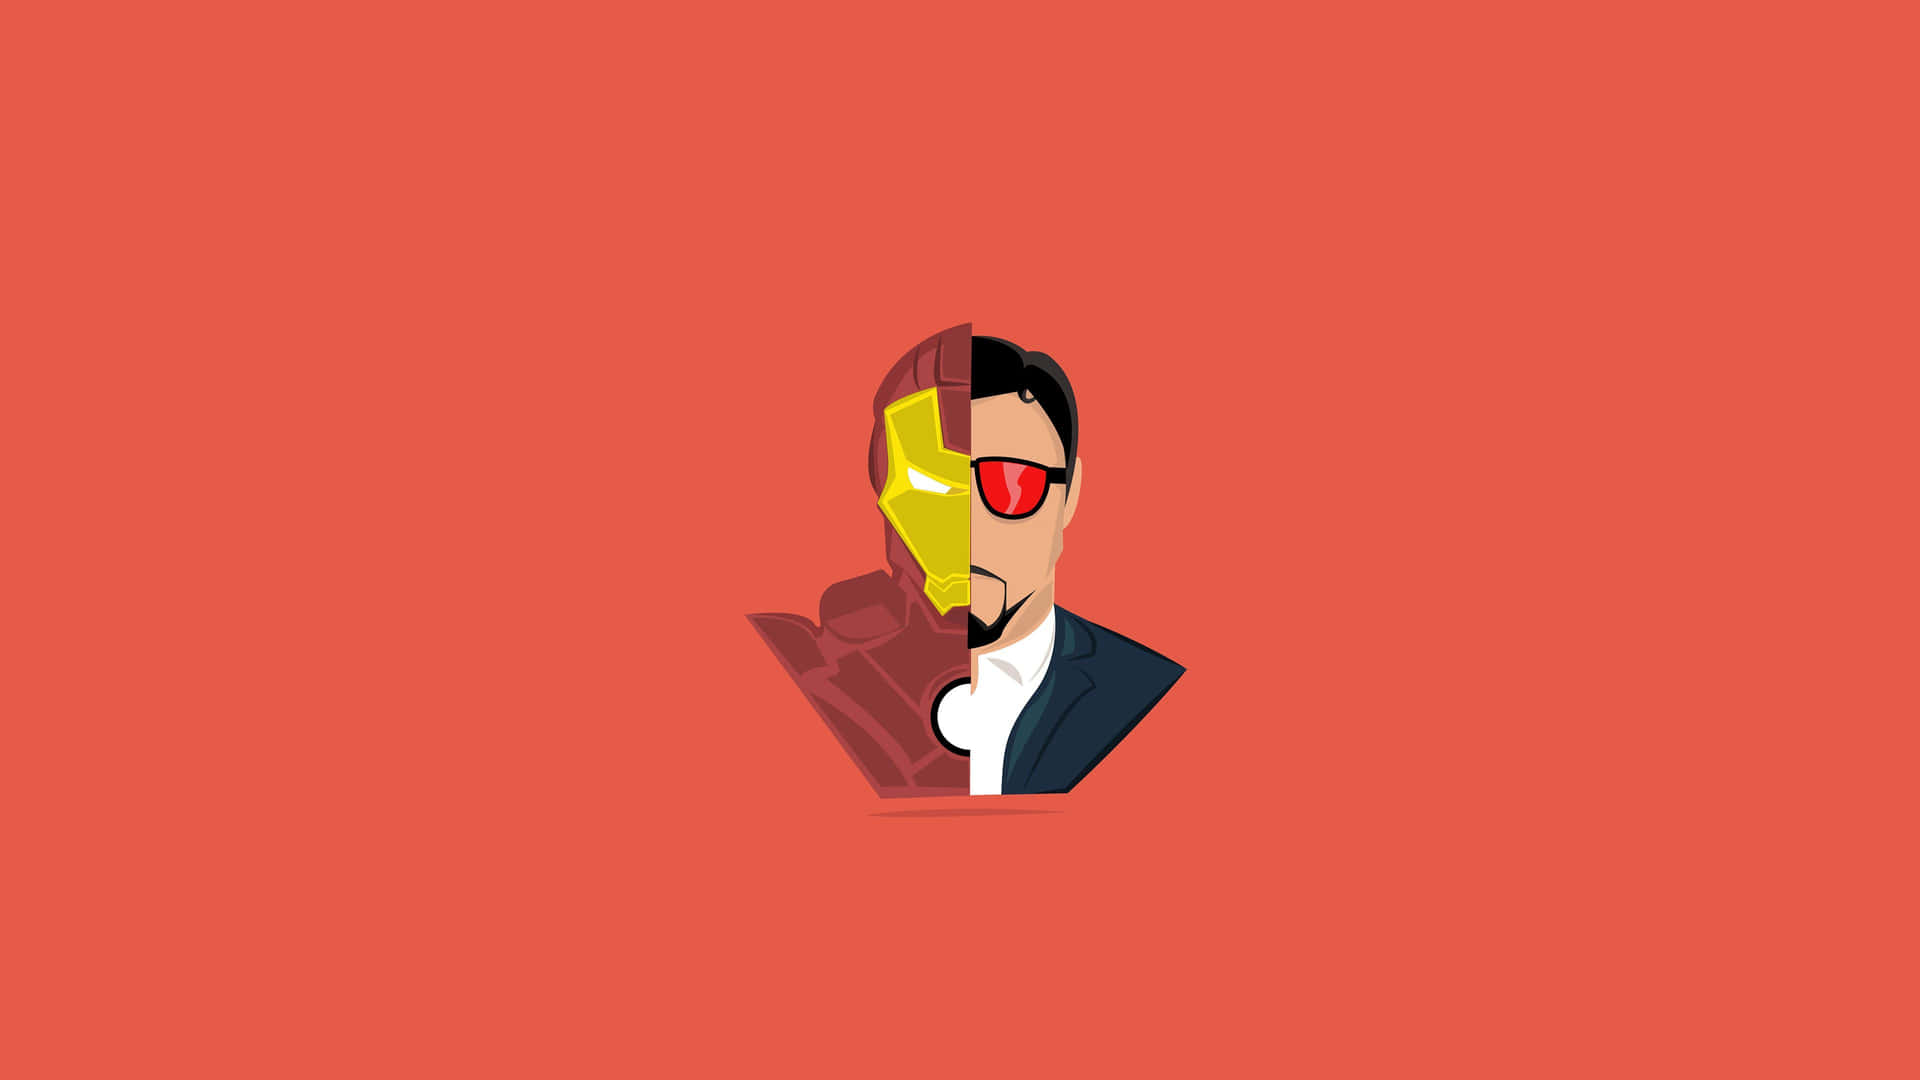 "All that Tony Stark does— he does in style!" Wallpaper